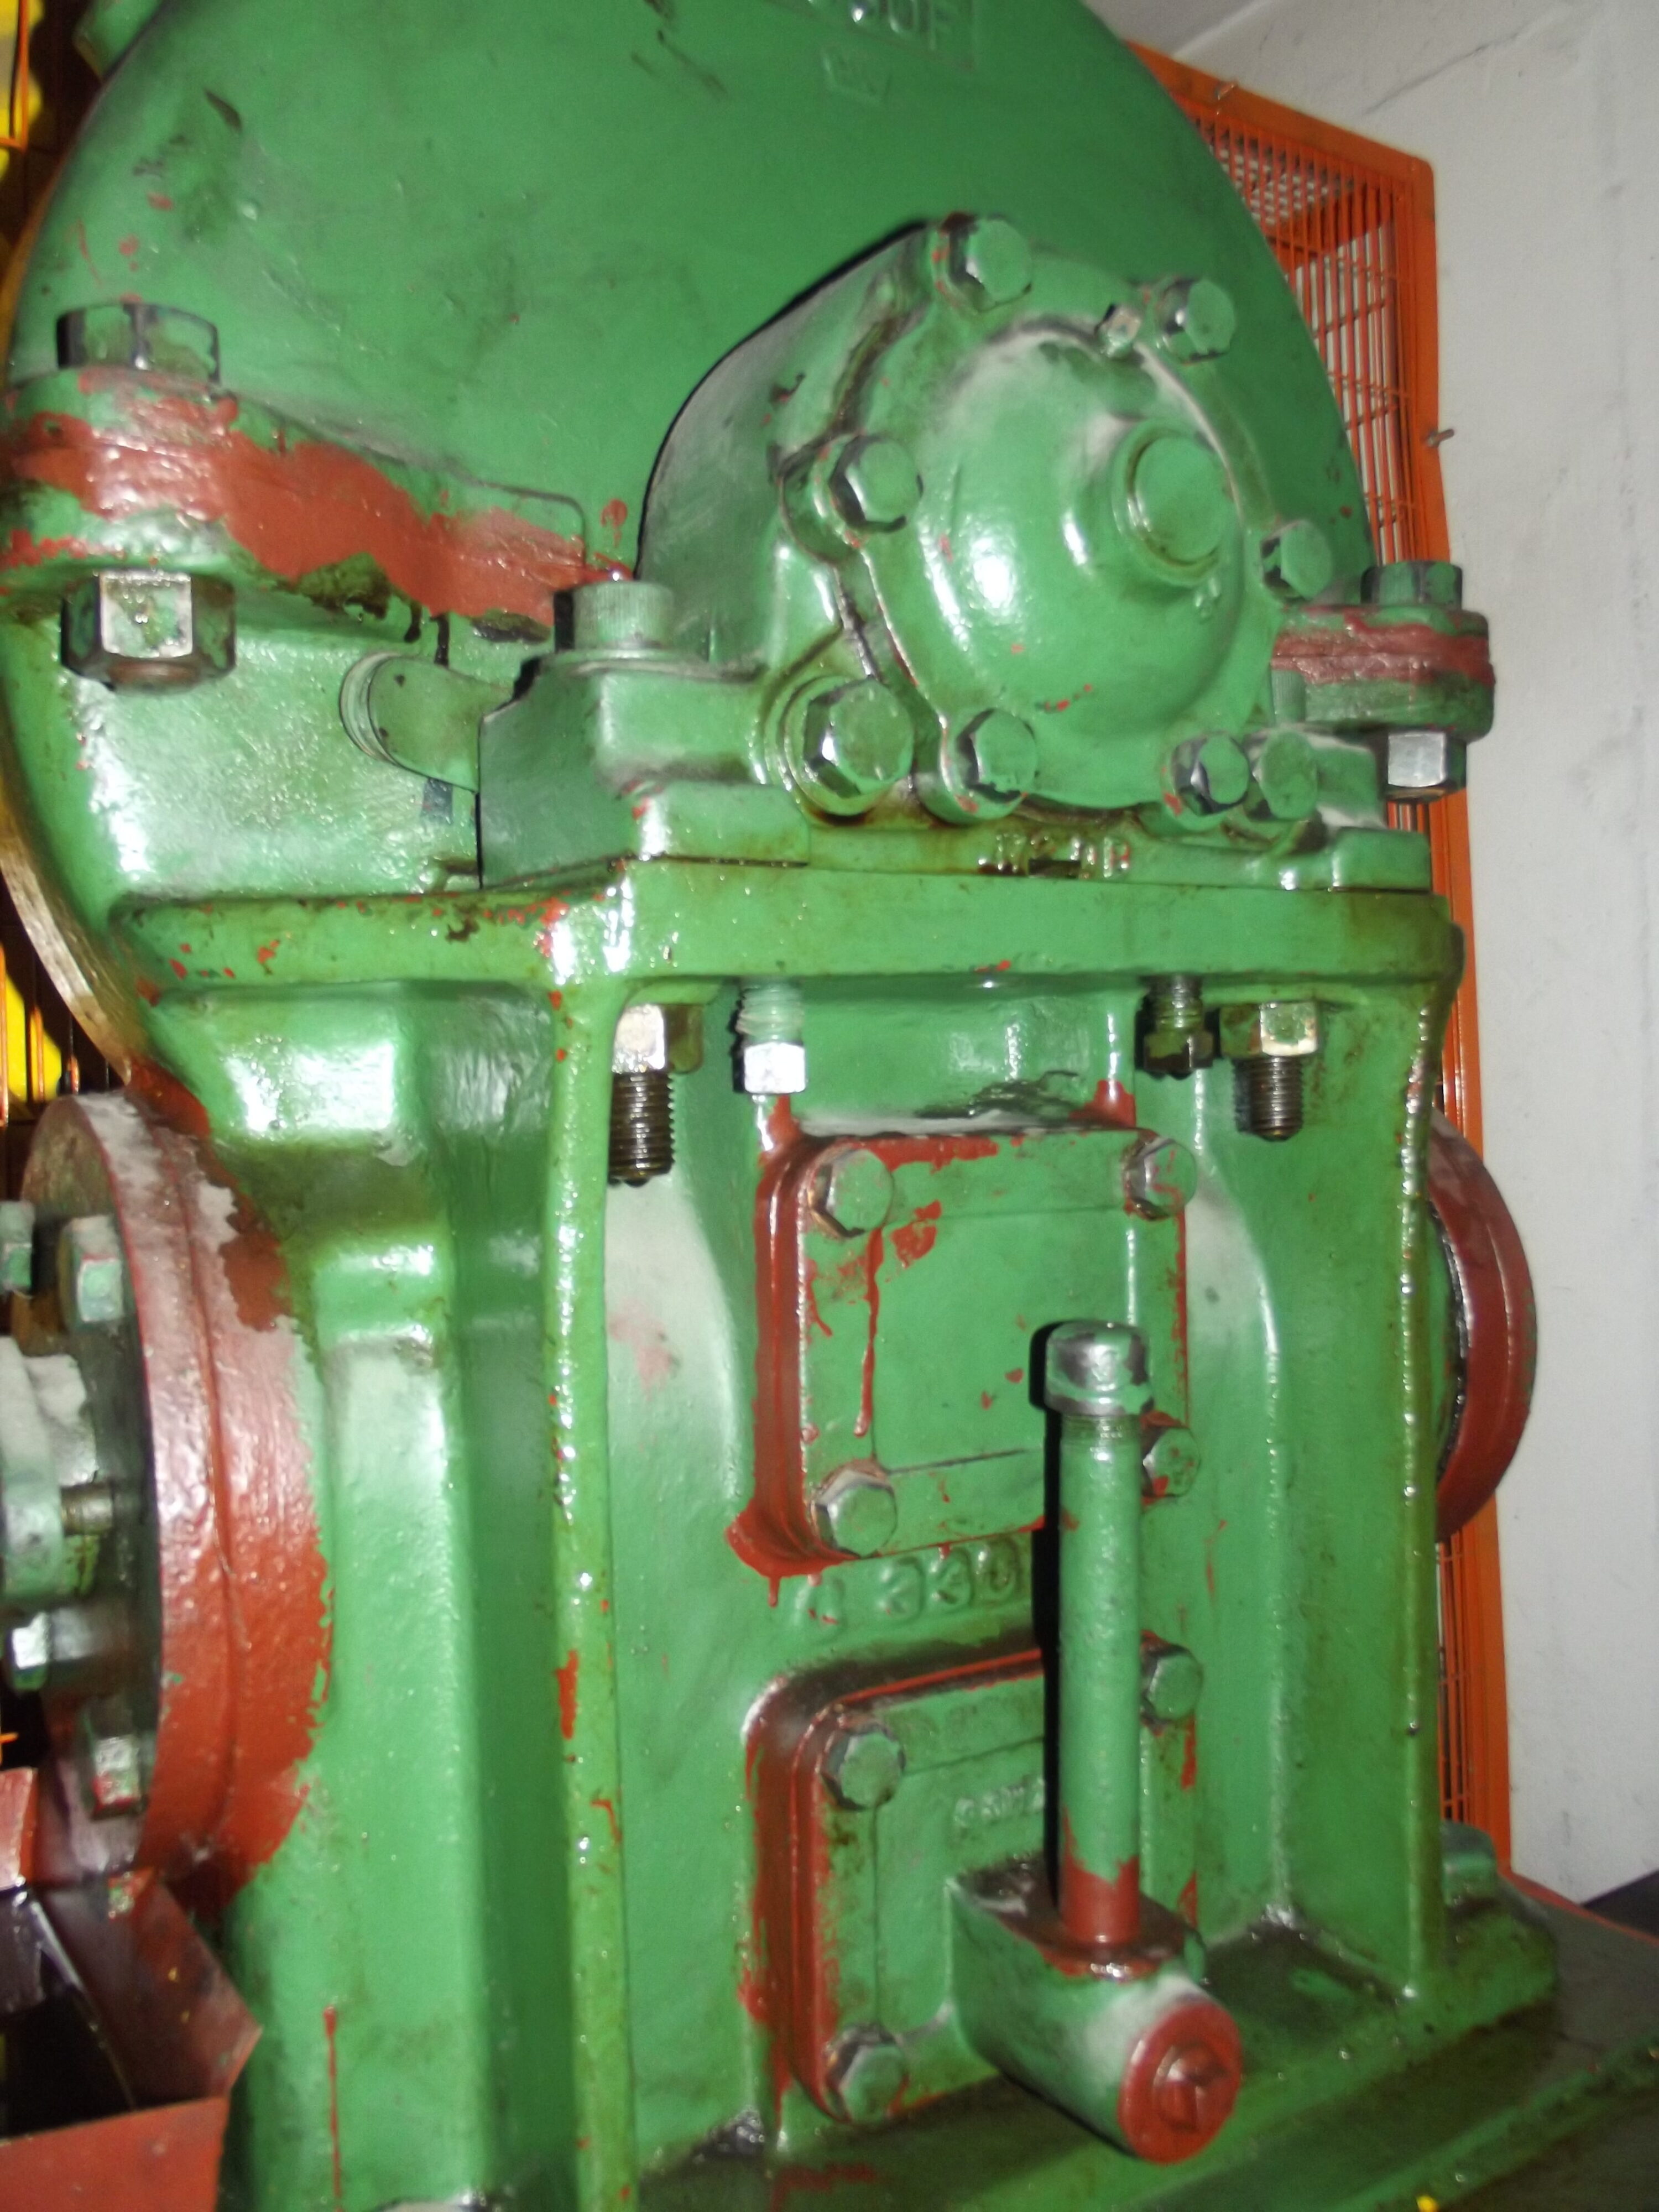 A lift's gearbox, 24 Sep 2011